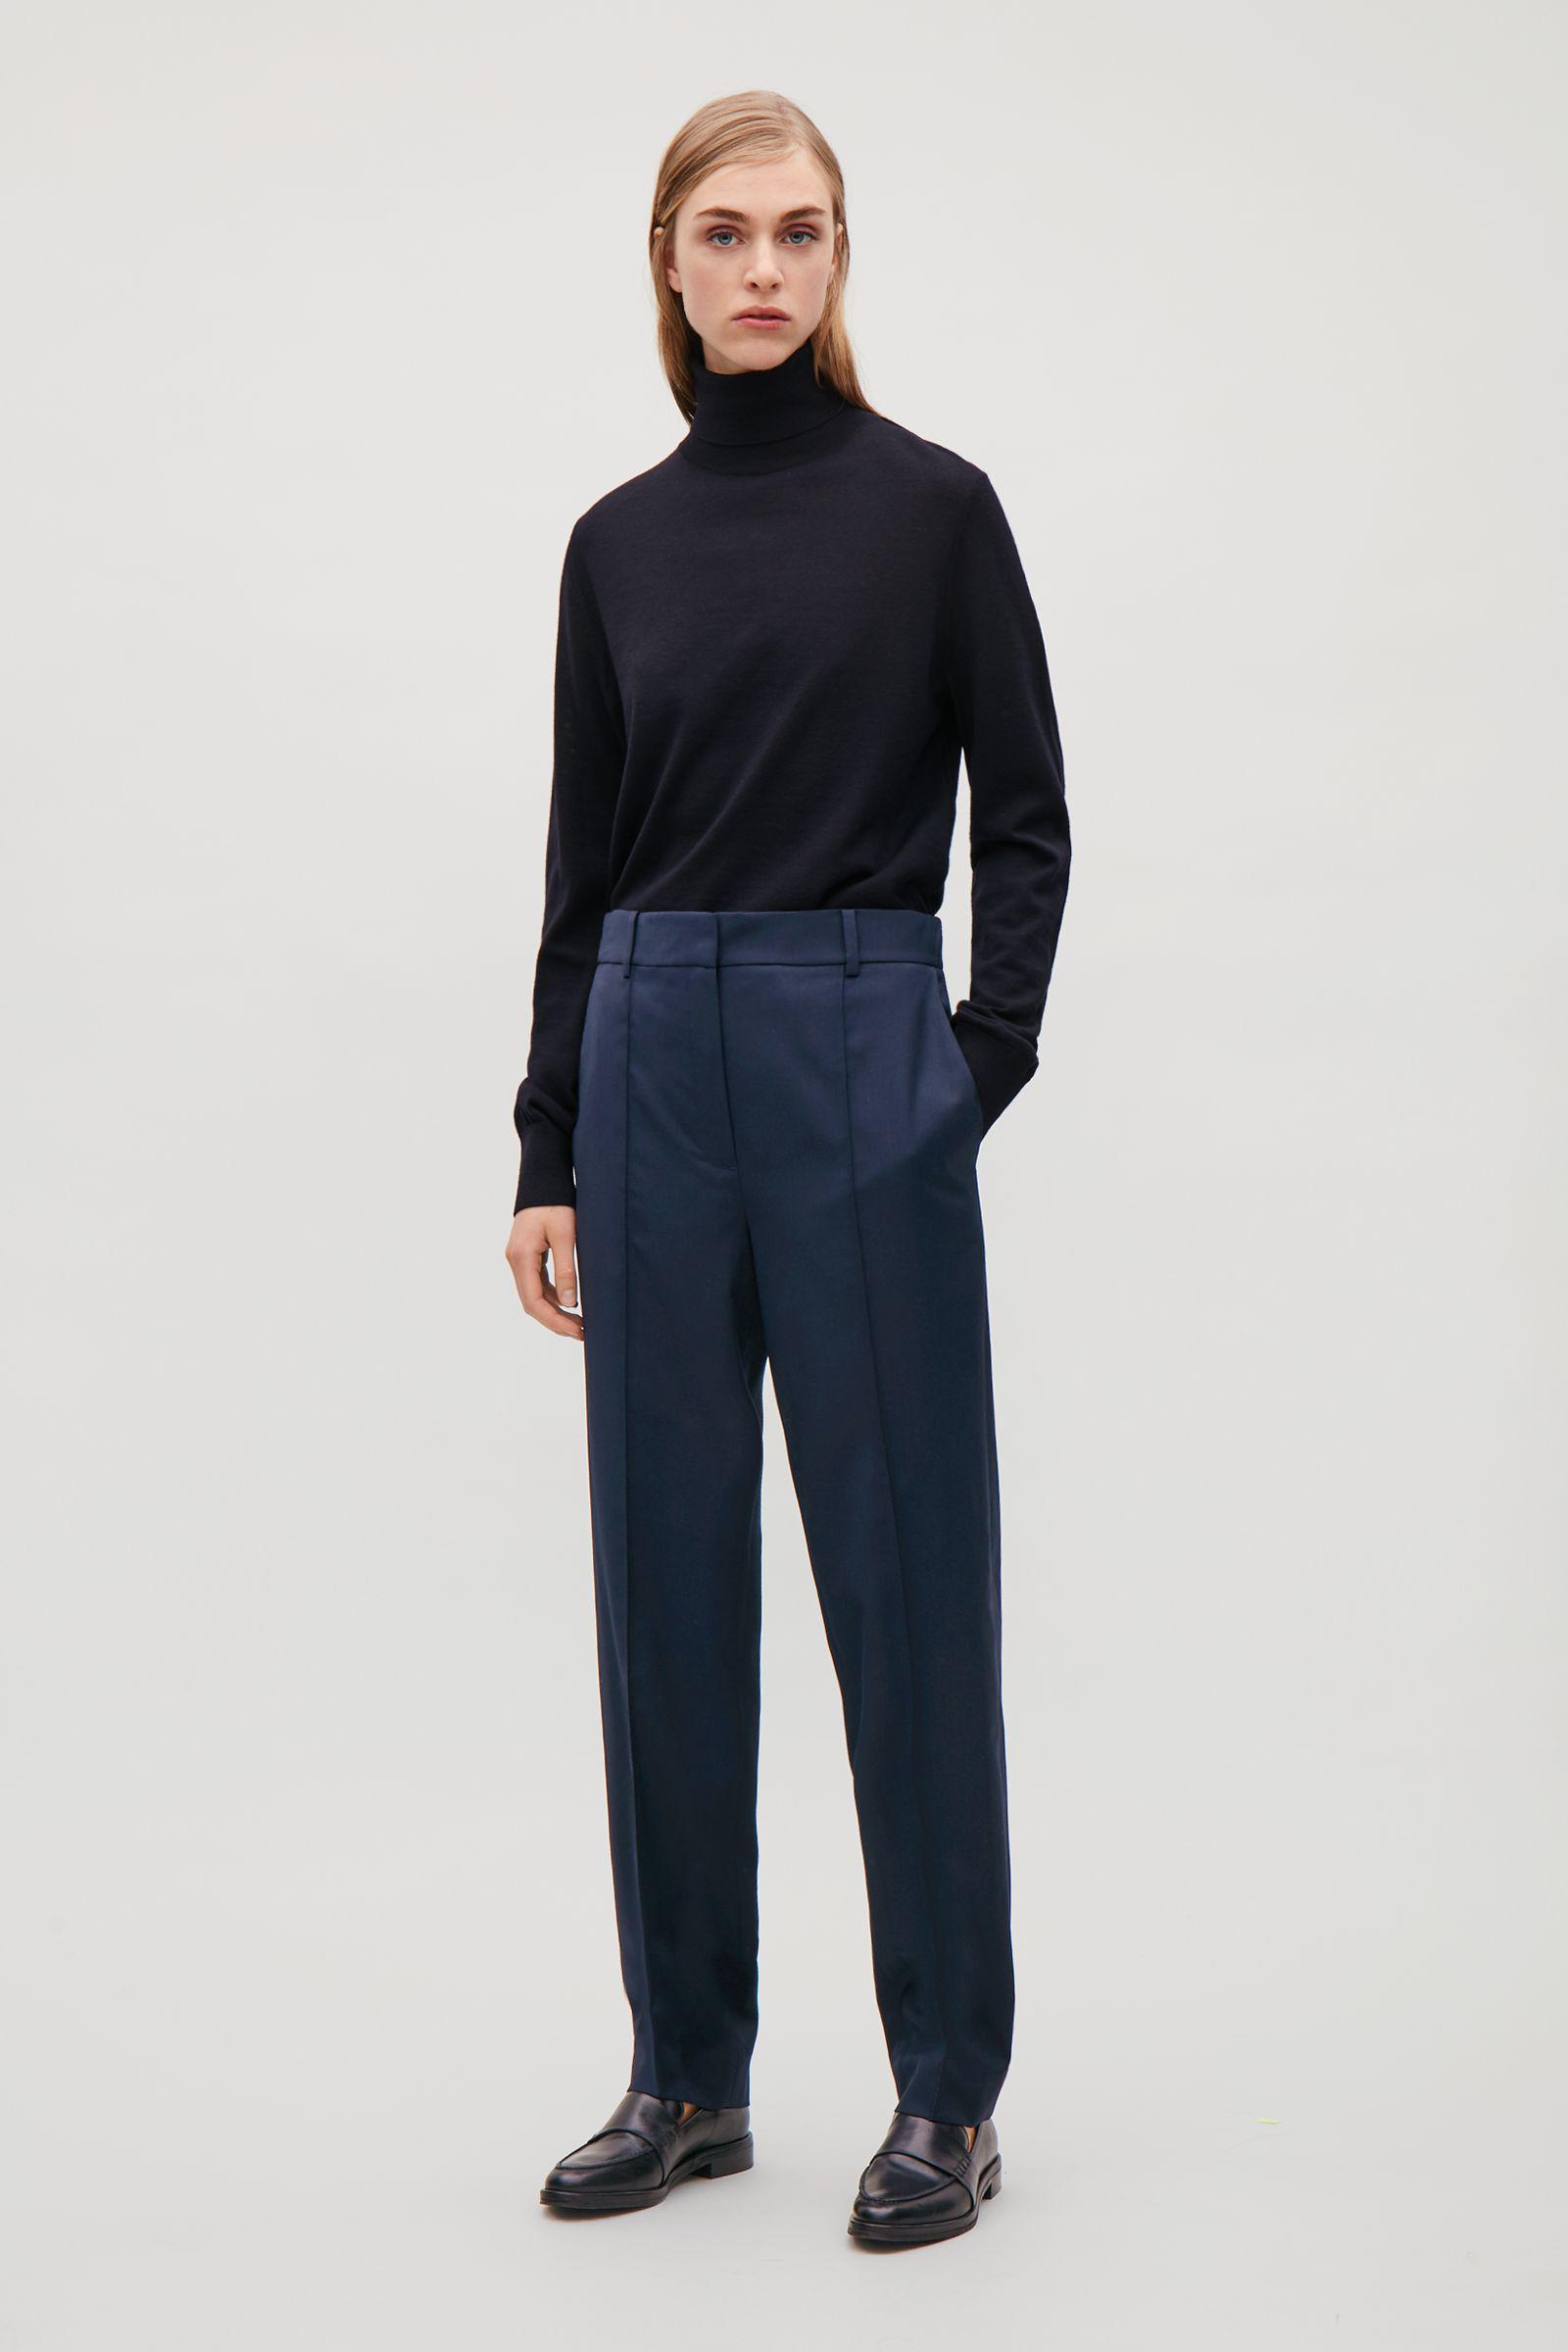 COS Elastic-back Wool Trousers in Navy (Blue) - Lyst